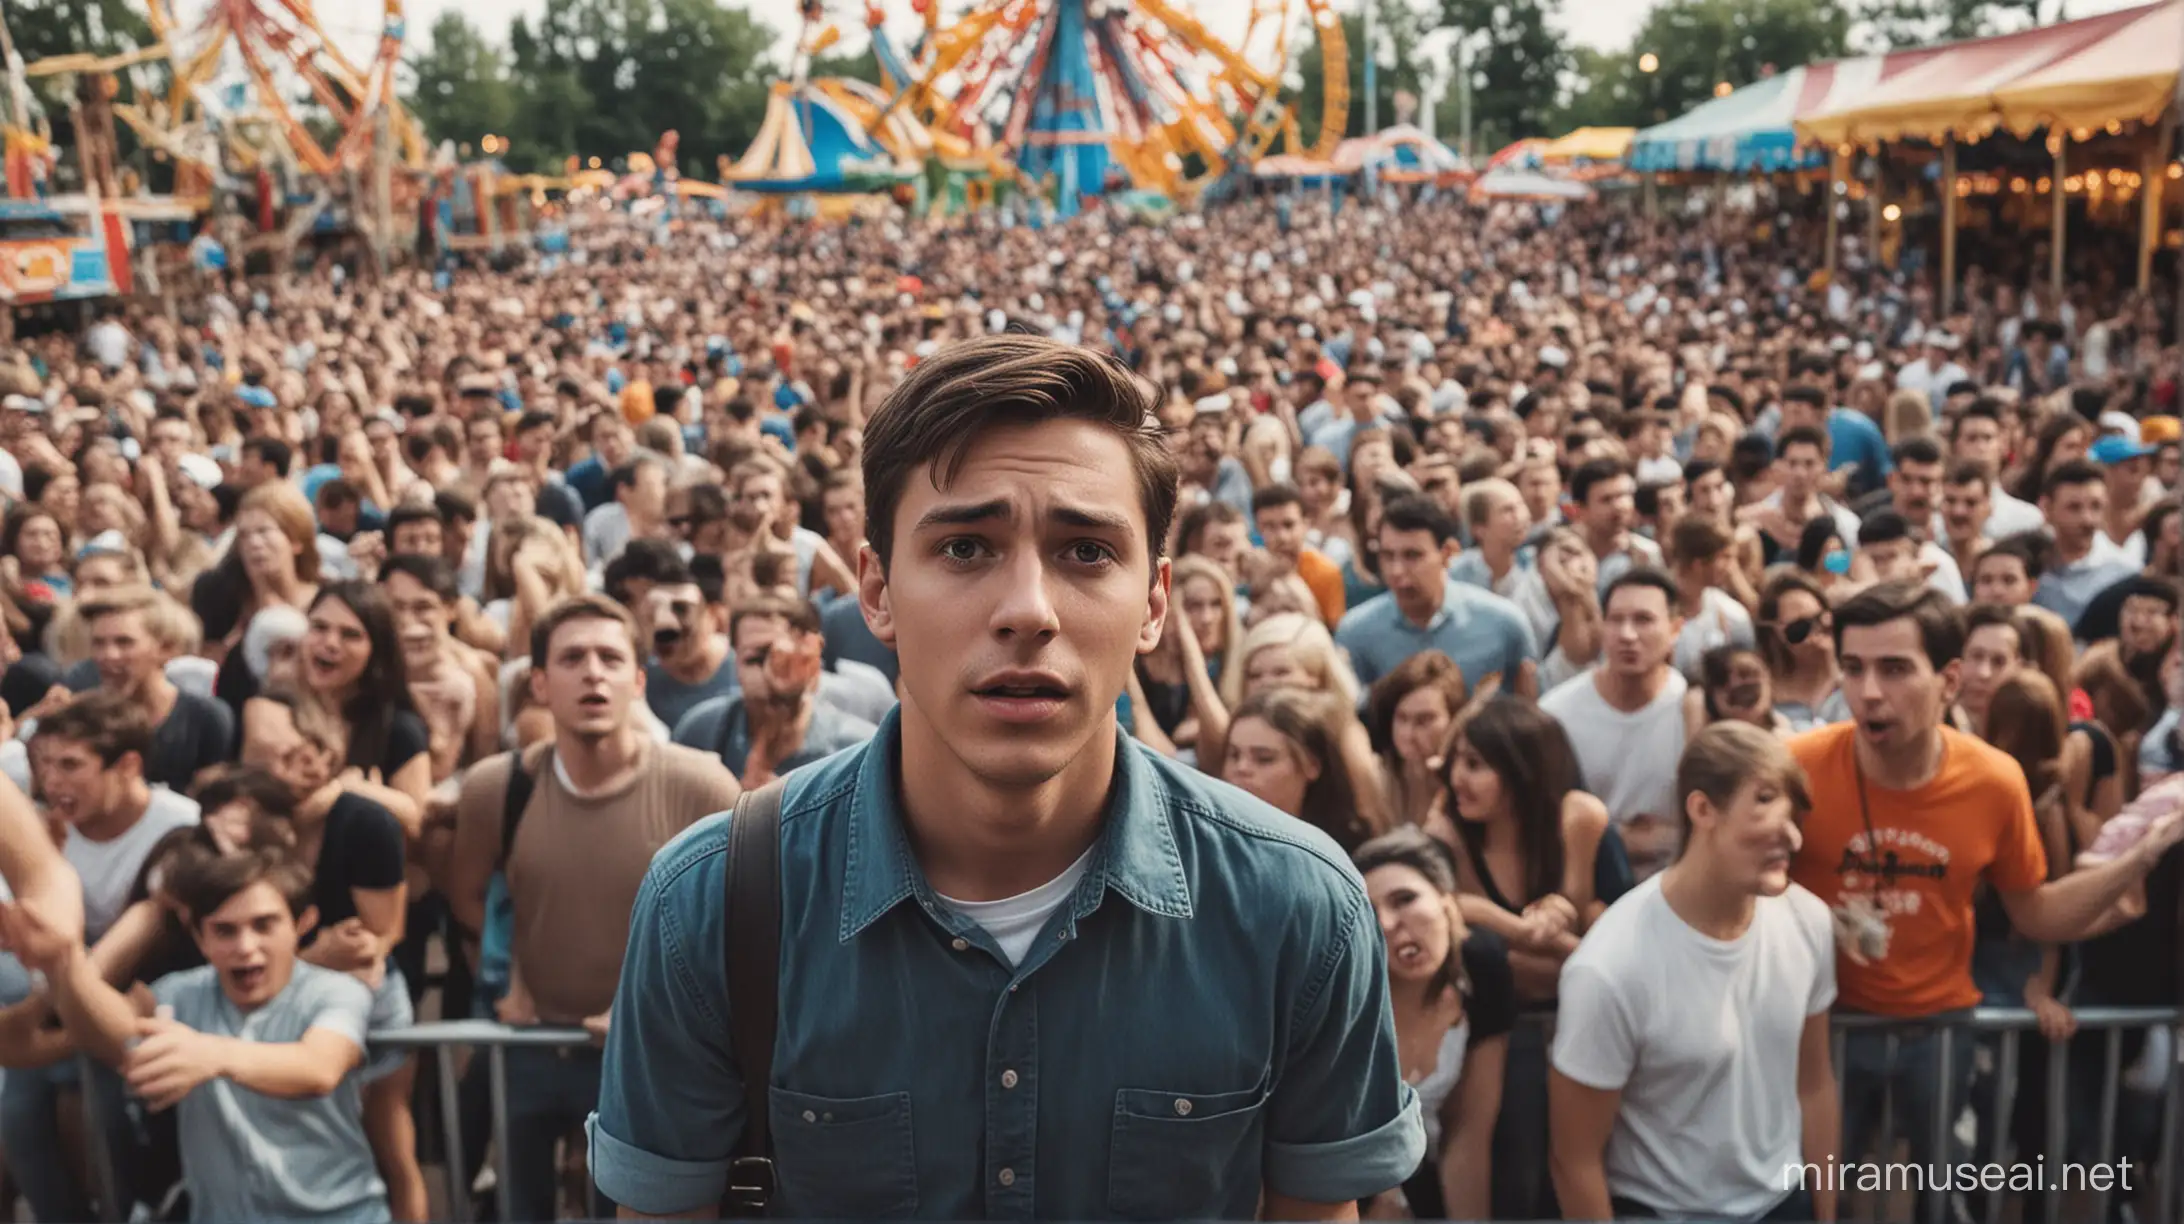 Help me generate an image where a person standing in the middle of the crowd in an amusement park and he feels so confused and tired.